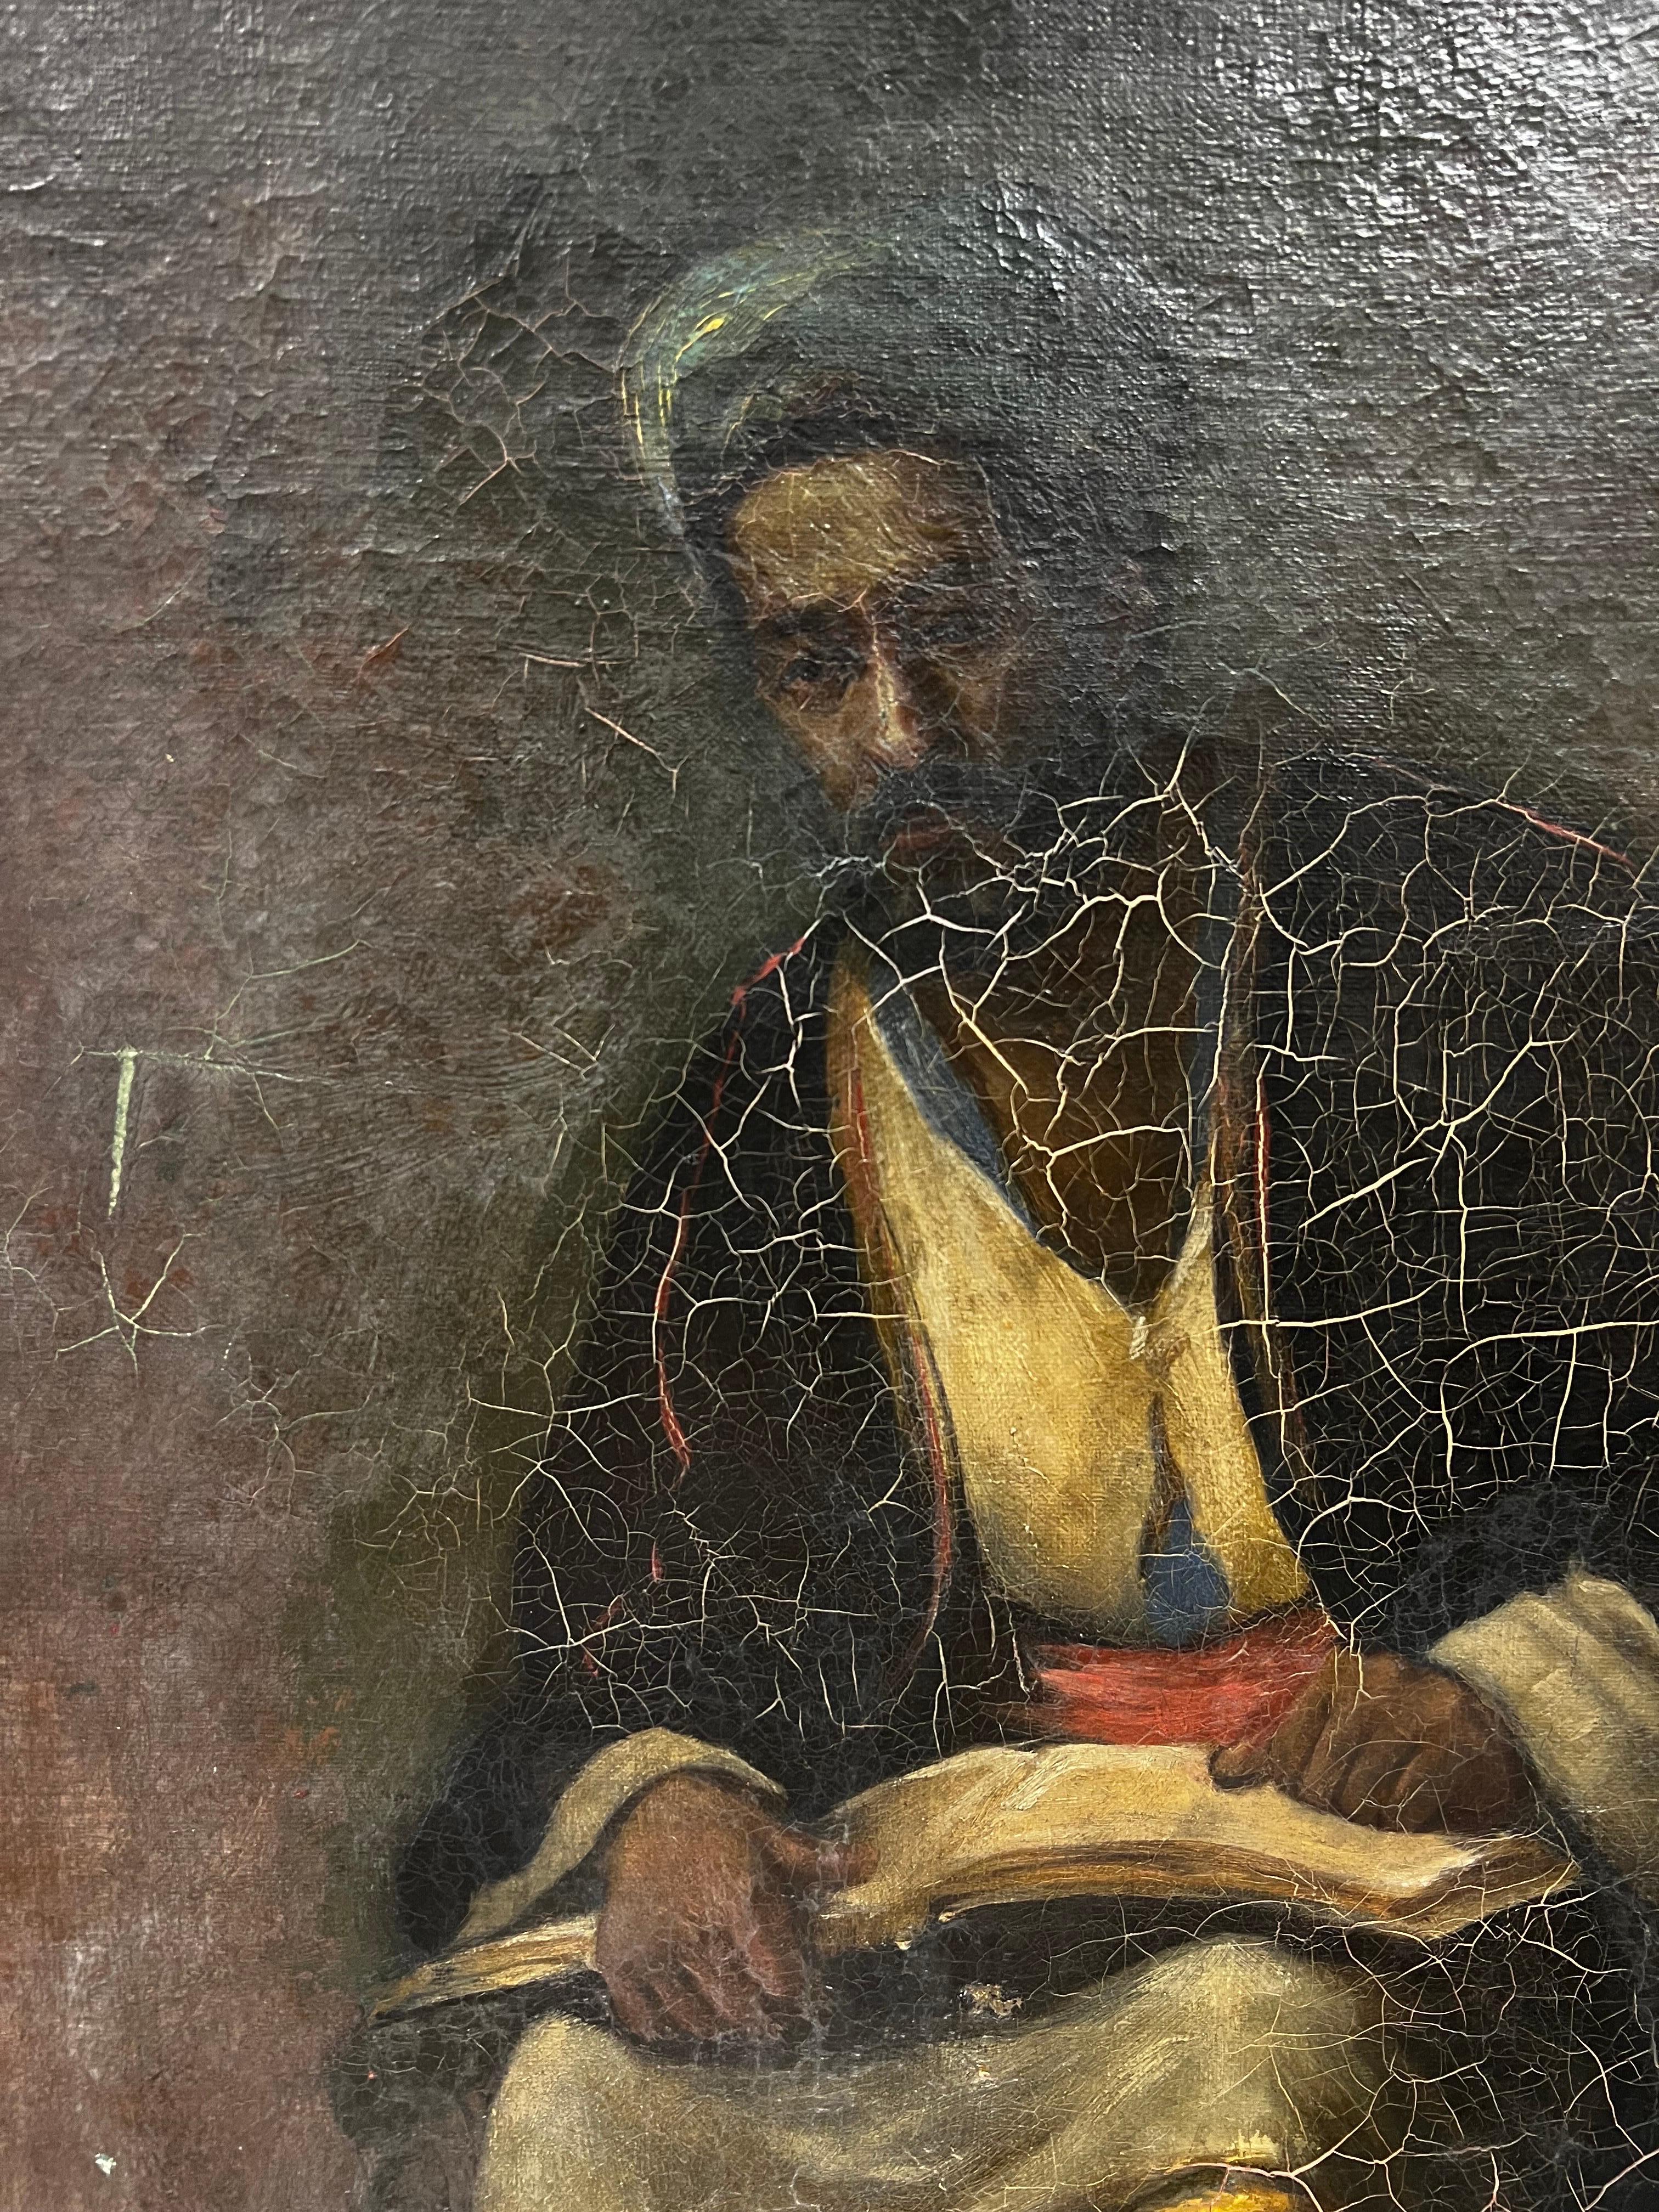 Artist/ School: French Orientalist School, late 19th century

Title: Portrait of a Seated Man reading

Medium: oil on canvas, unframed 

Canvas : 24 x 20 inches

Provenance: private collection, UK

Condition: The painting is offered for restoration